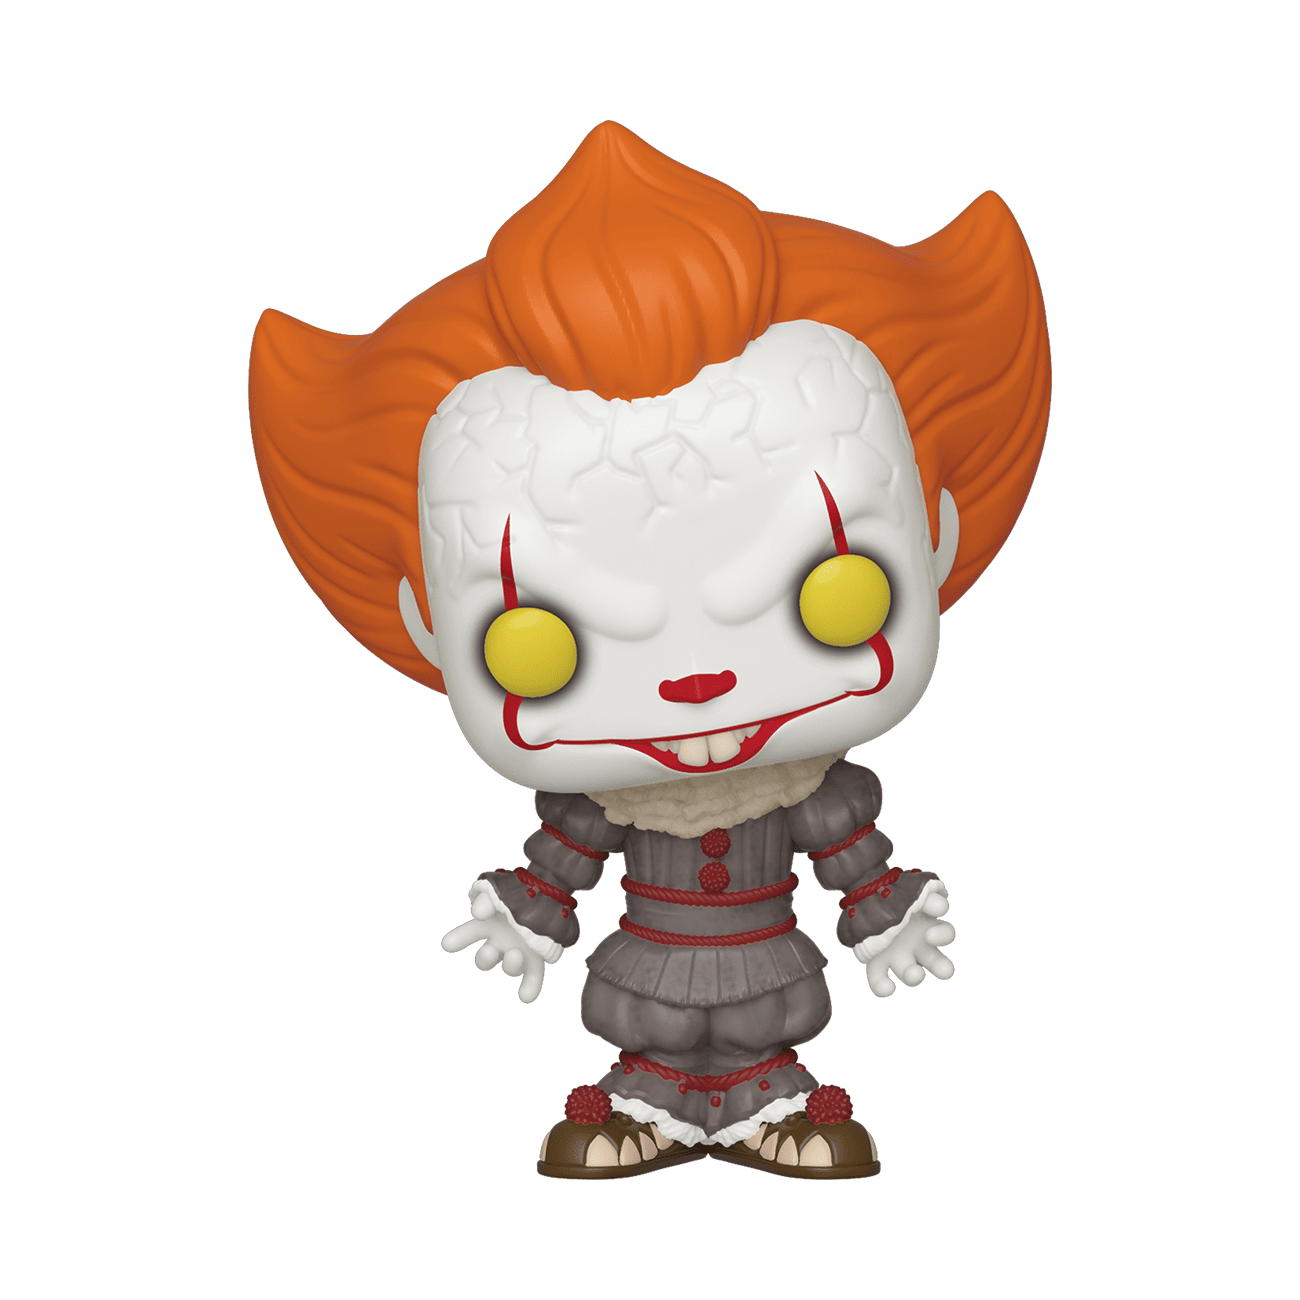 Buy Pennywise at Funko.